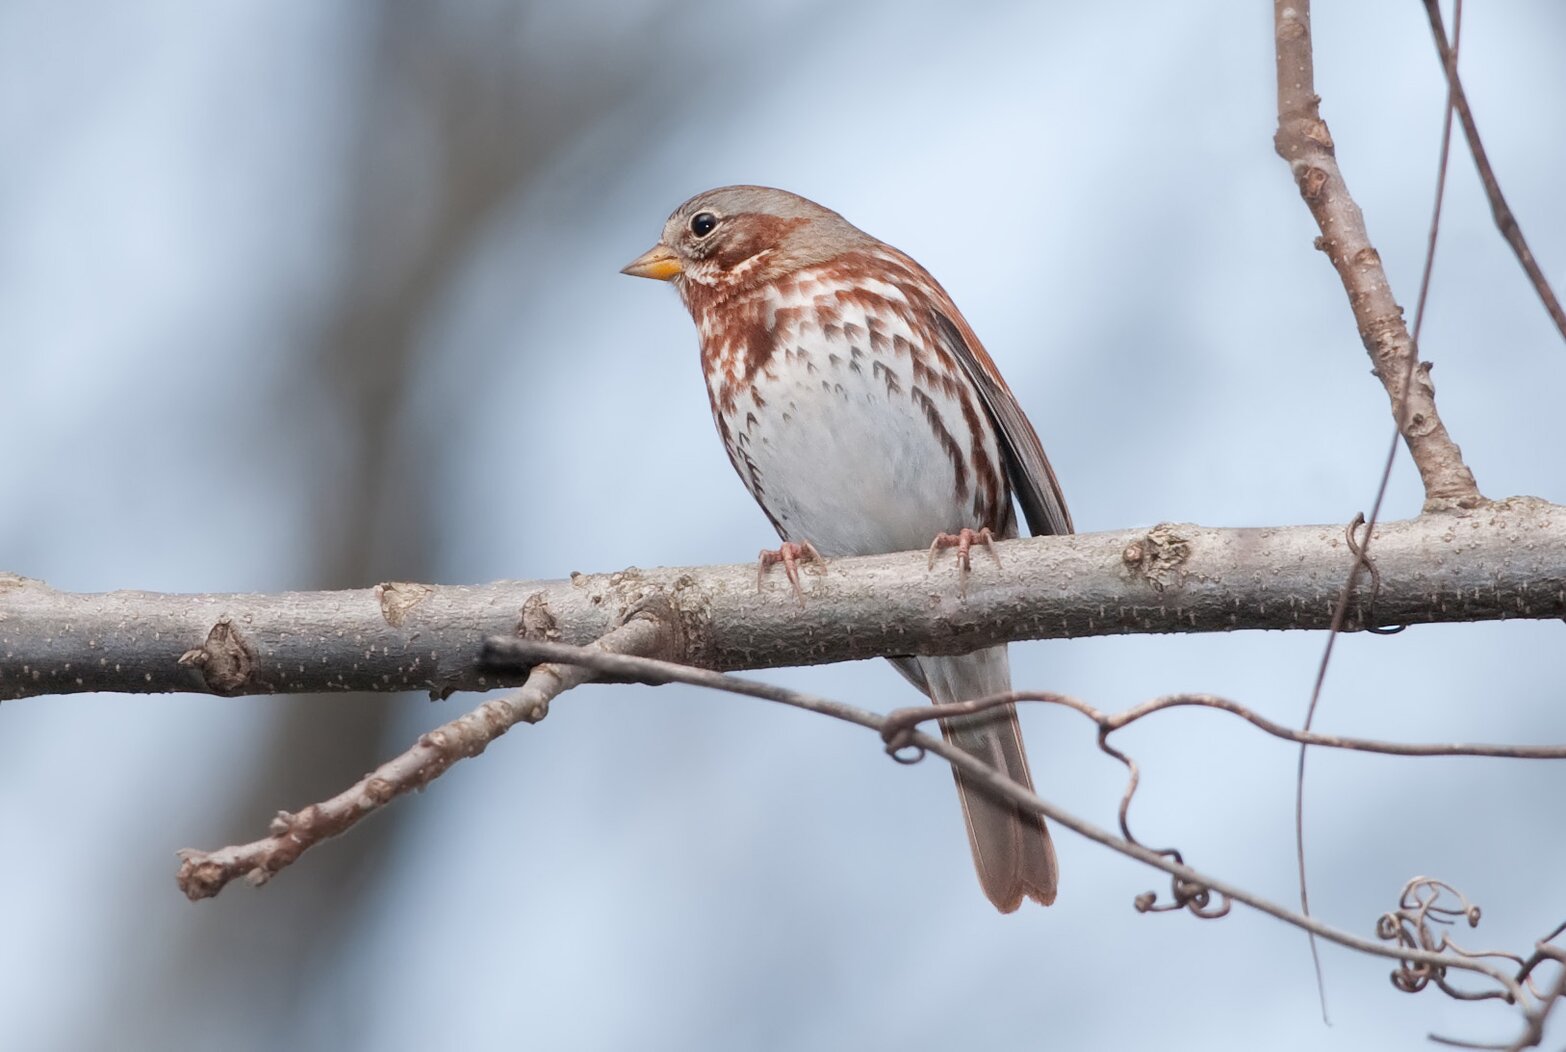 Late fall through spring, Fox Sparrows are frequently seen in William T. Davis Wildlife Refuge. Photo: Kelly Colgan Azar/CC BY-ND 2.0